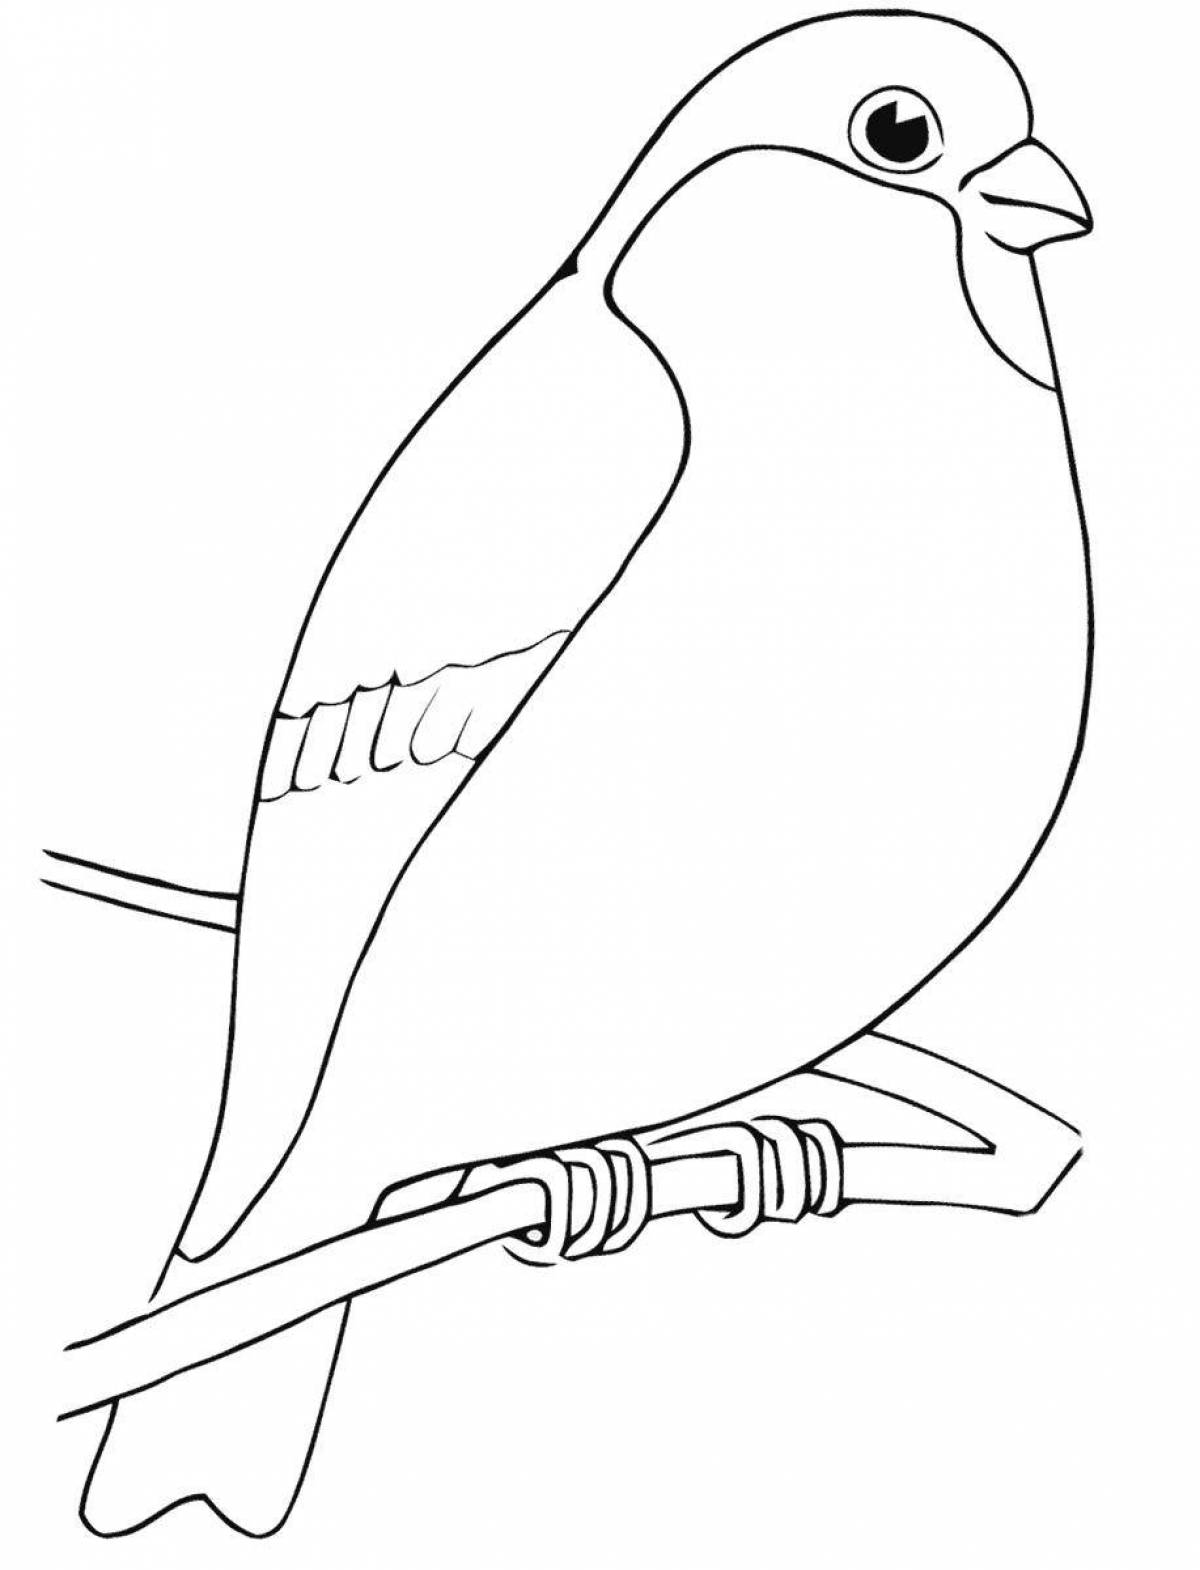 A fascinating drawing of a bullfinch